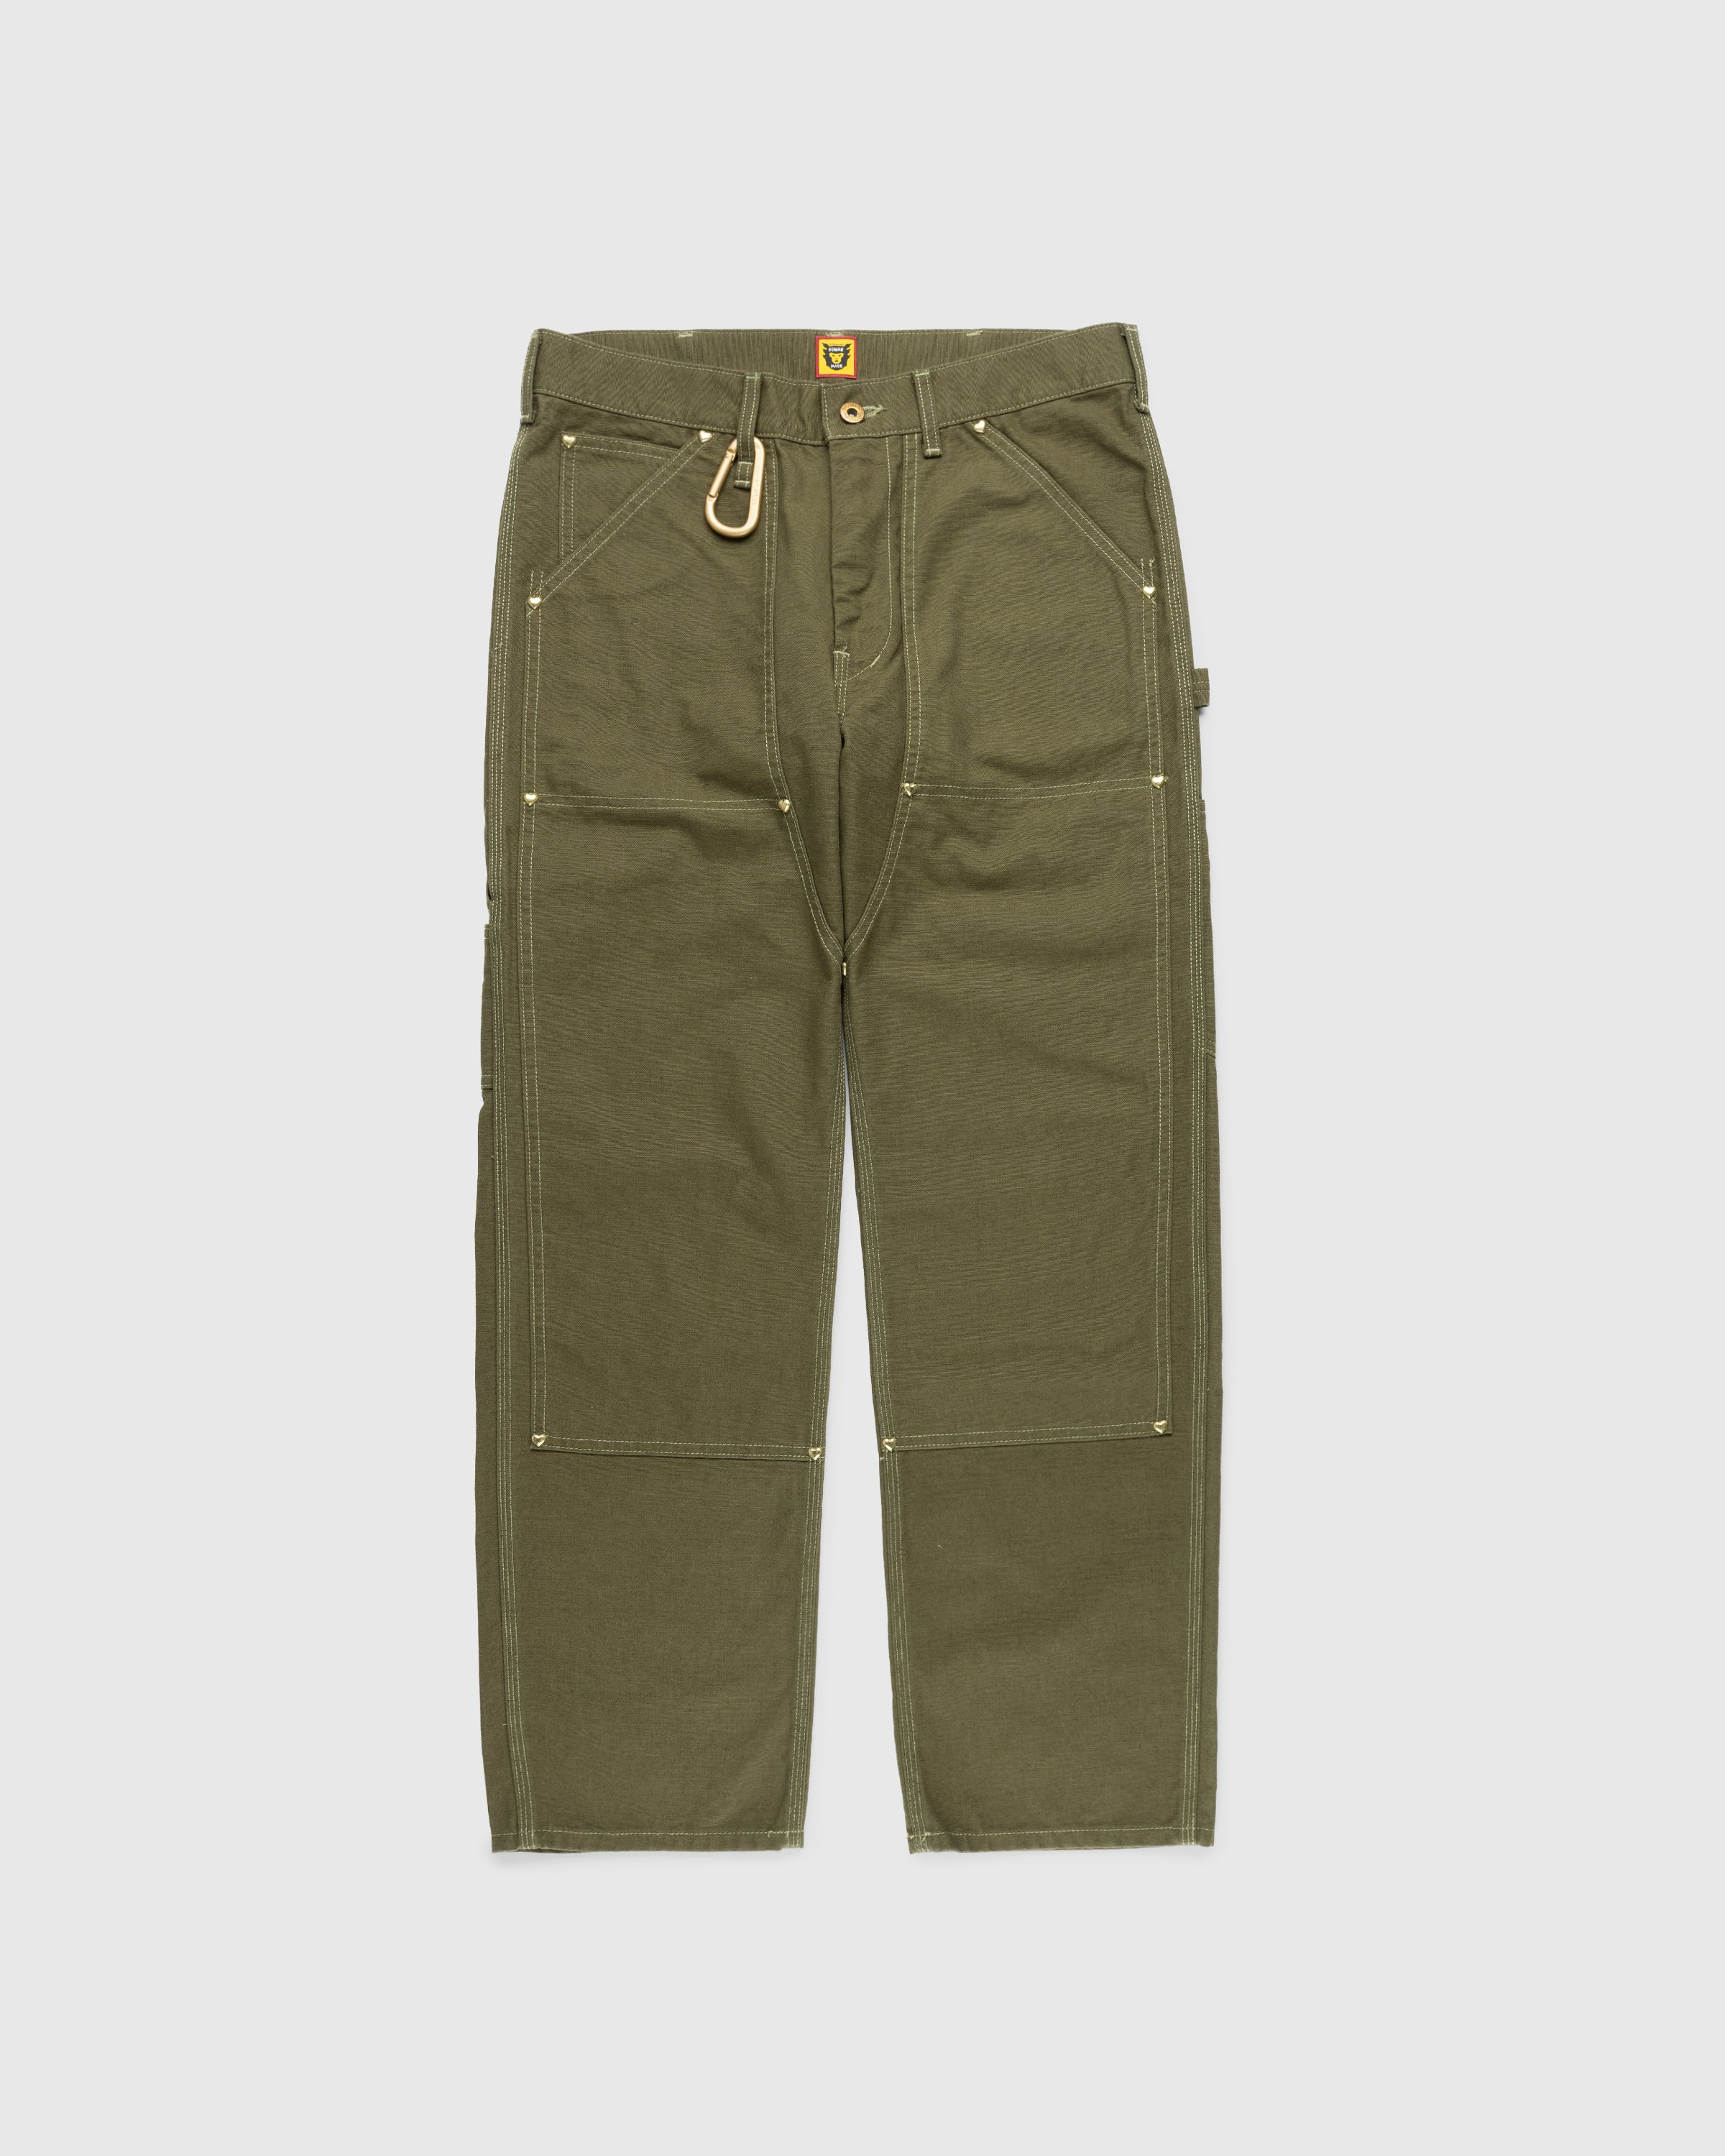 Human Made - Duck Painter Pants Olive Drab - Clothing - Green - Image 1